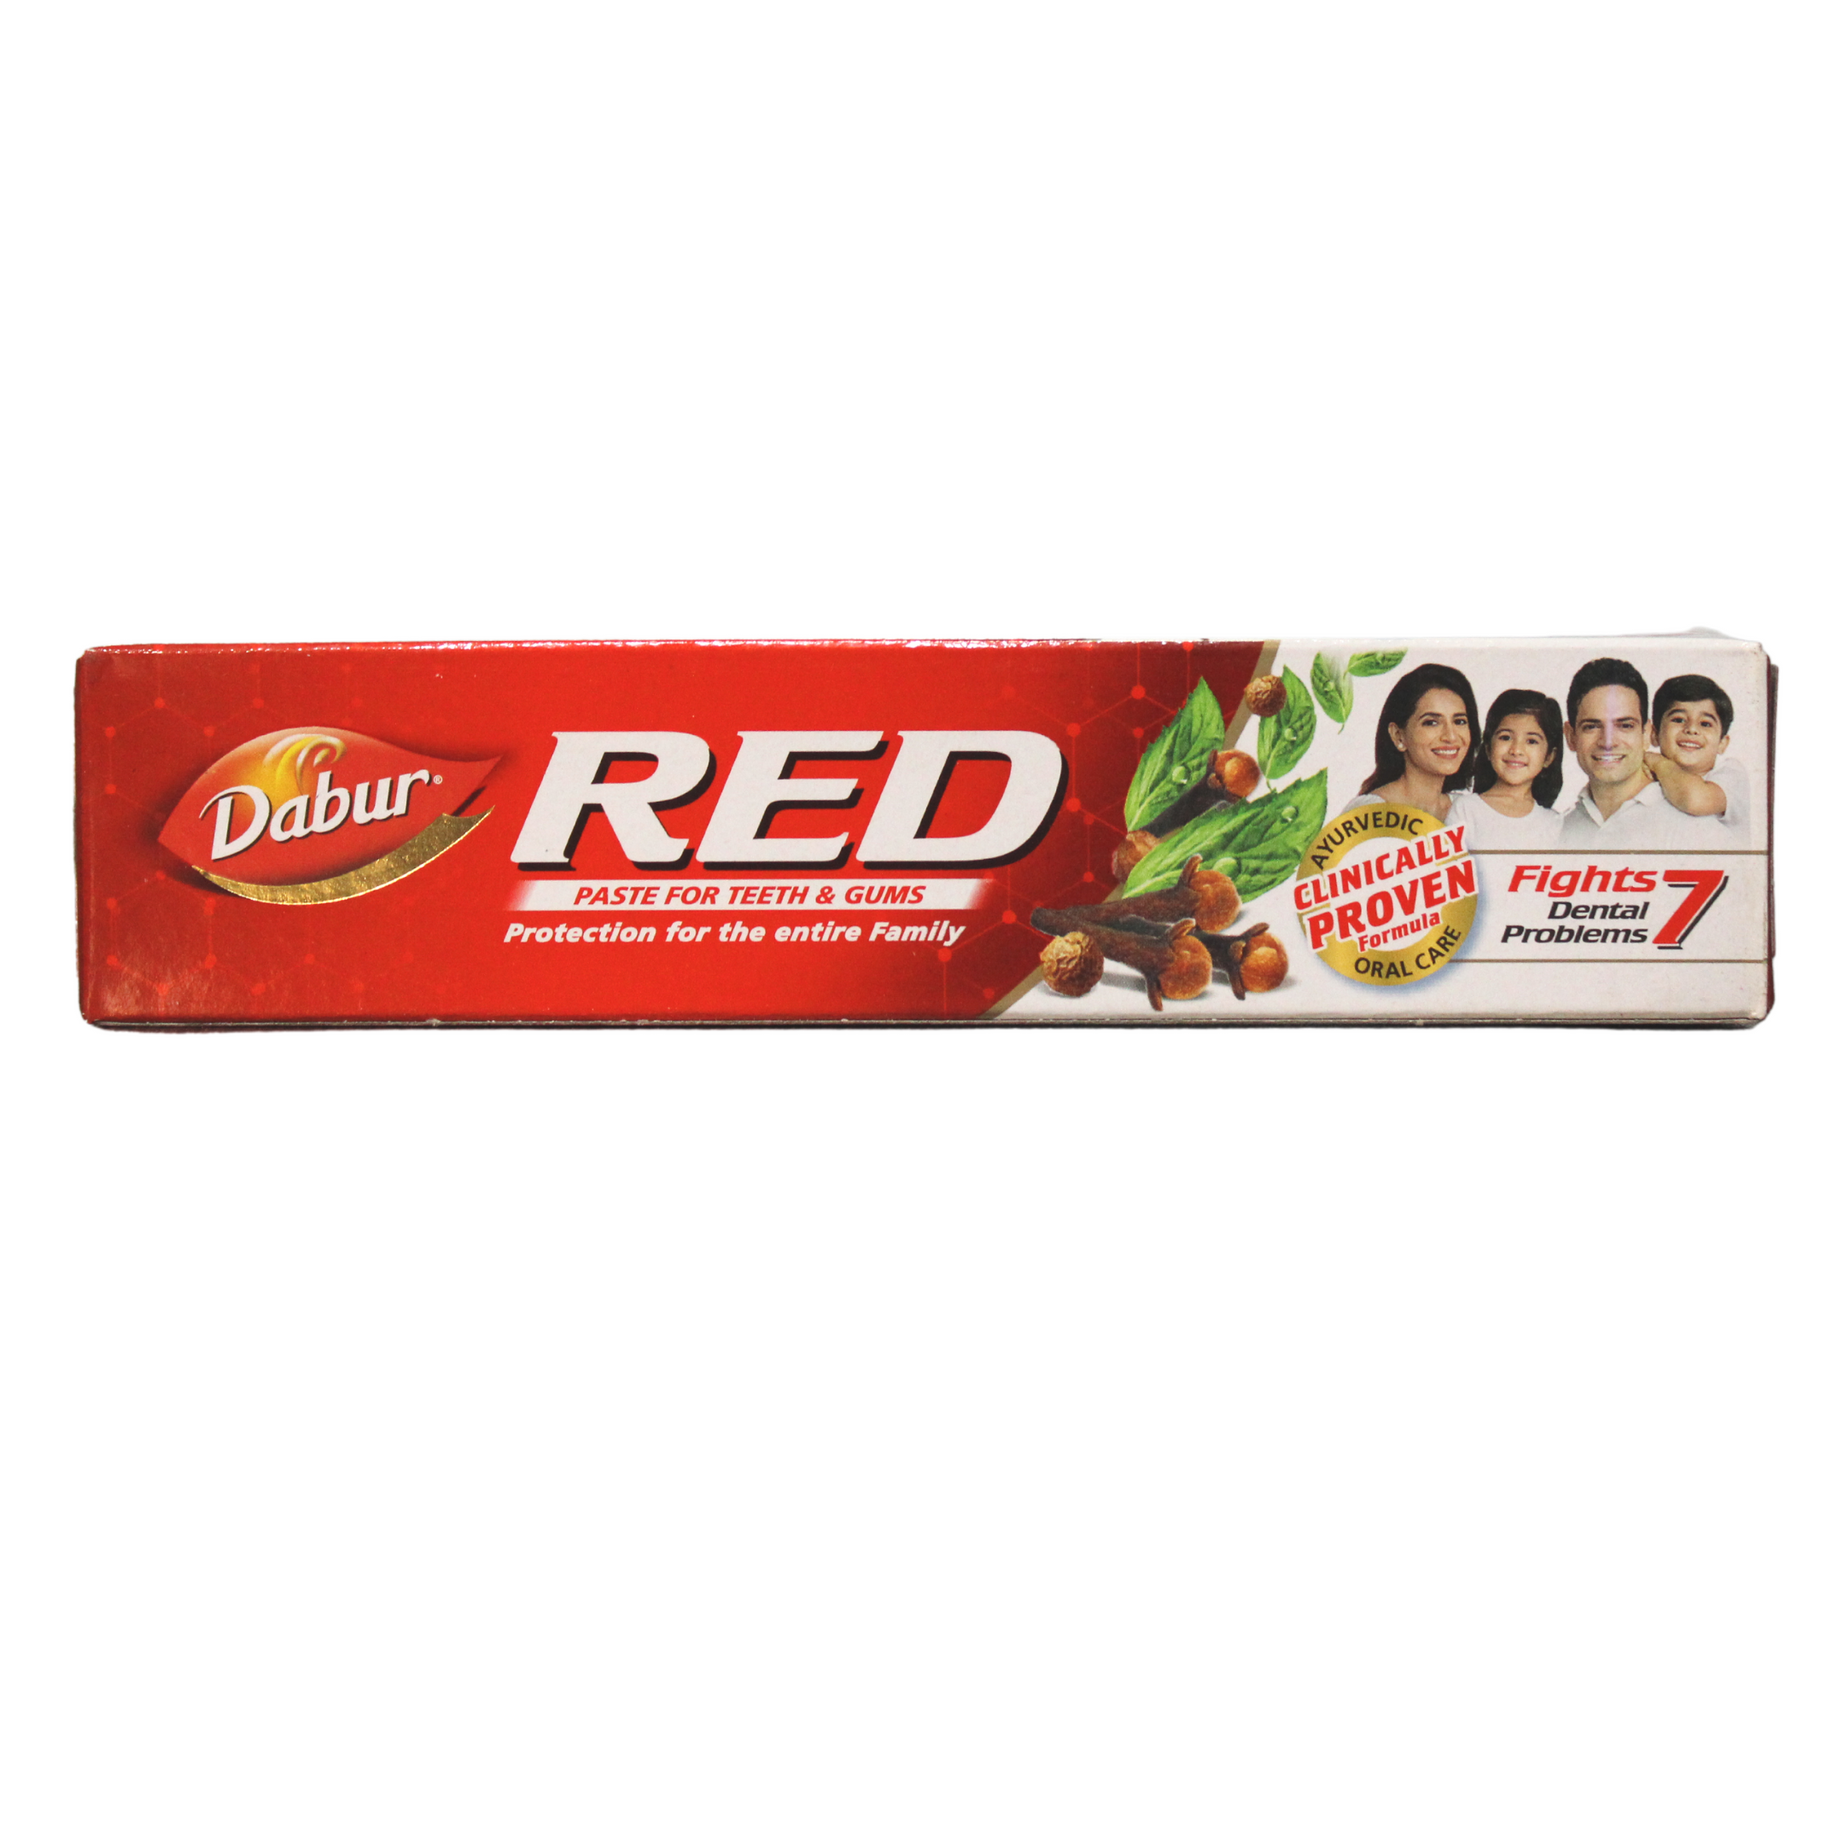 Shop Dabur Red Toothpaste 100gm at price 58.00 from Dabur Online - Ayush Care